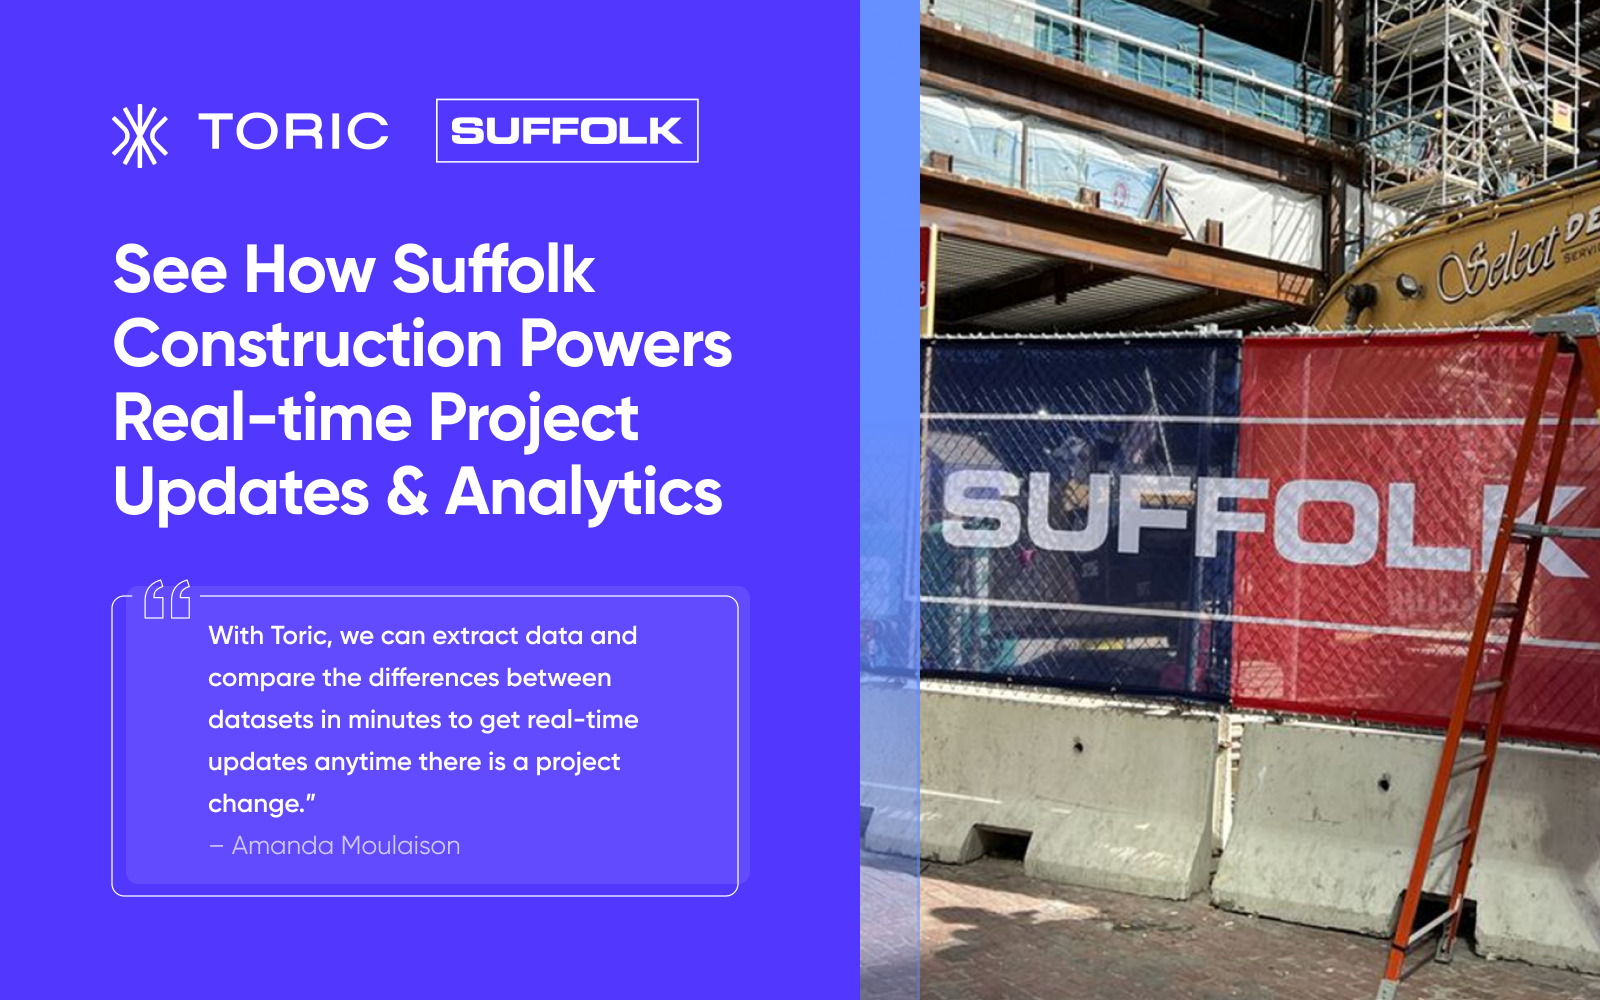 How Suffolk Construction leverages Procore data in real-time with Toric